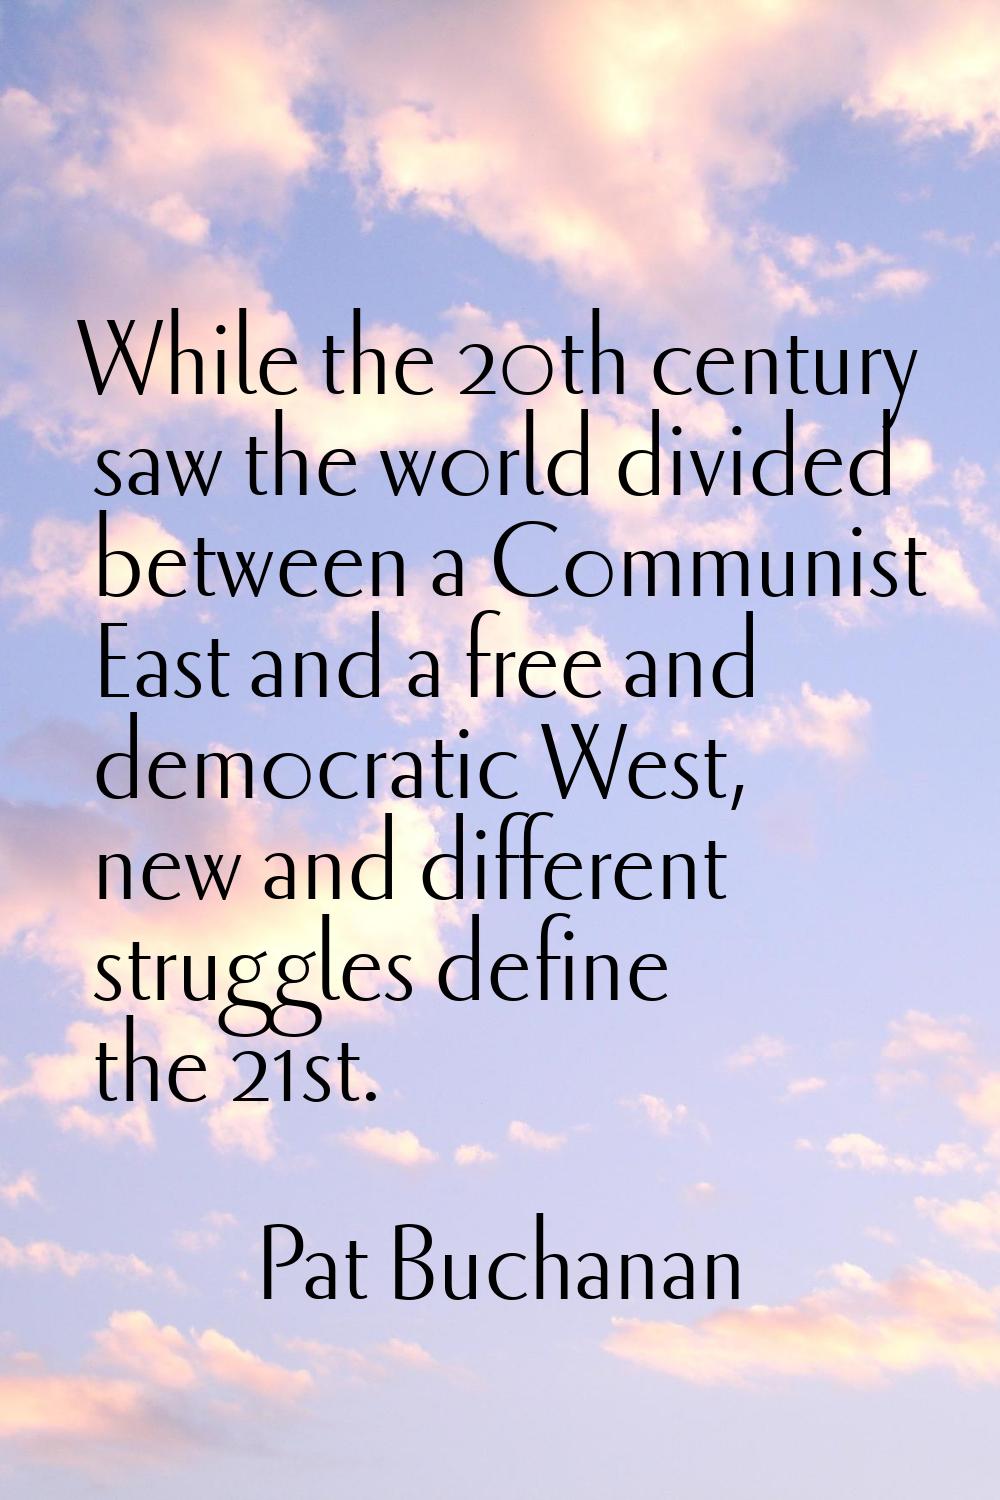 While the 20th century saw the world divided between a Communist East and a free and democratic Wes